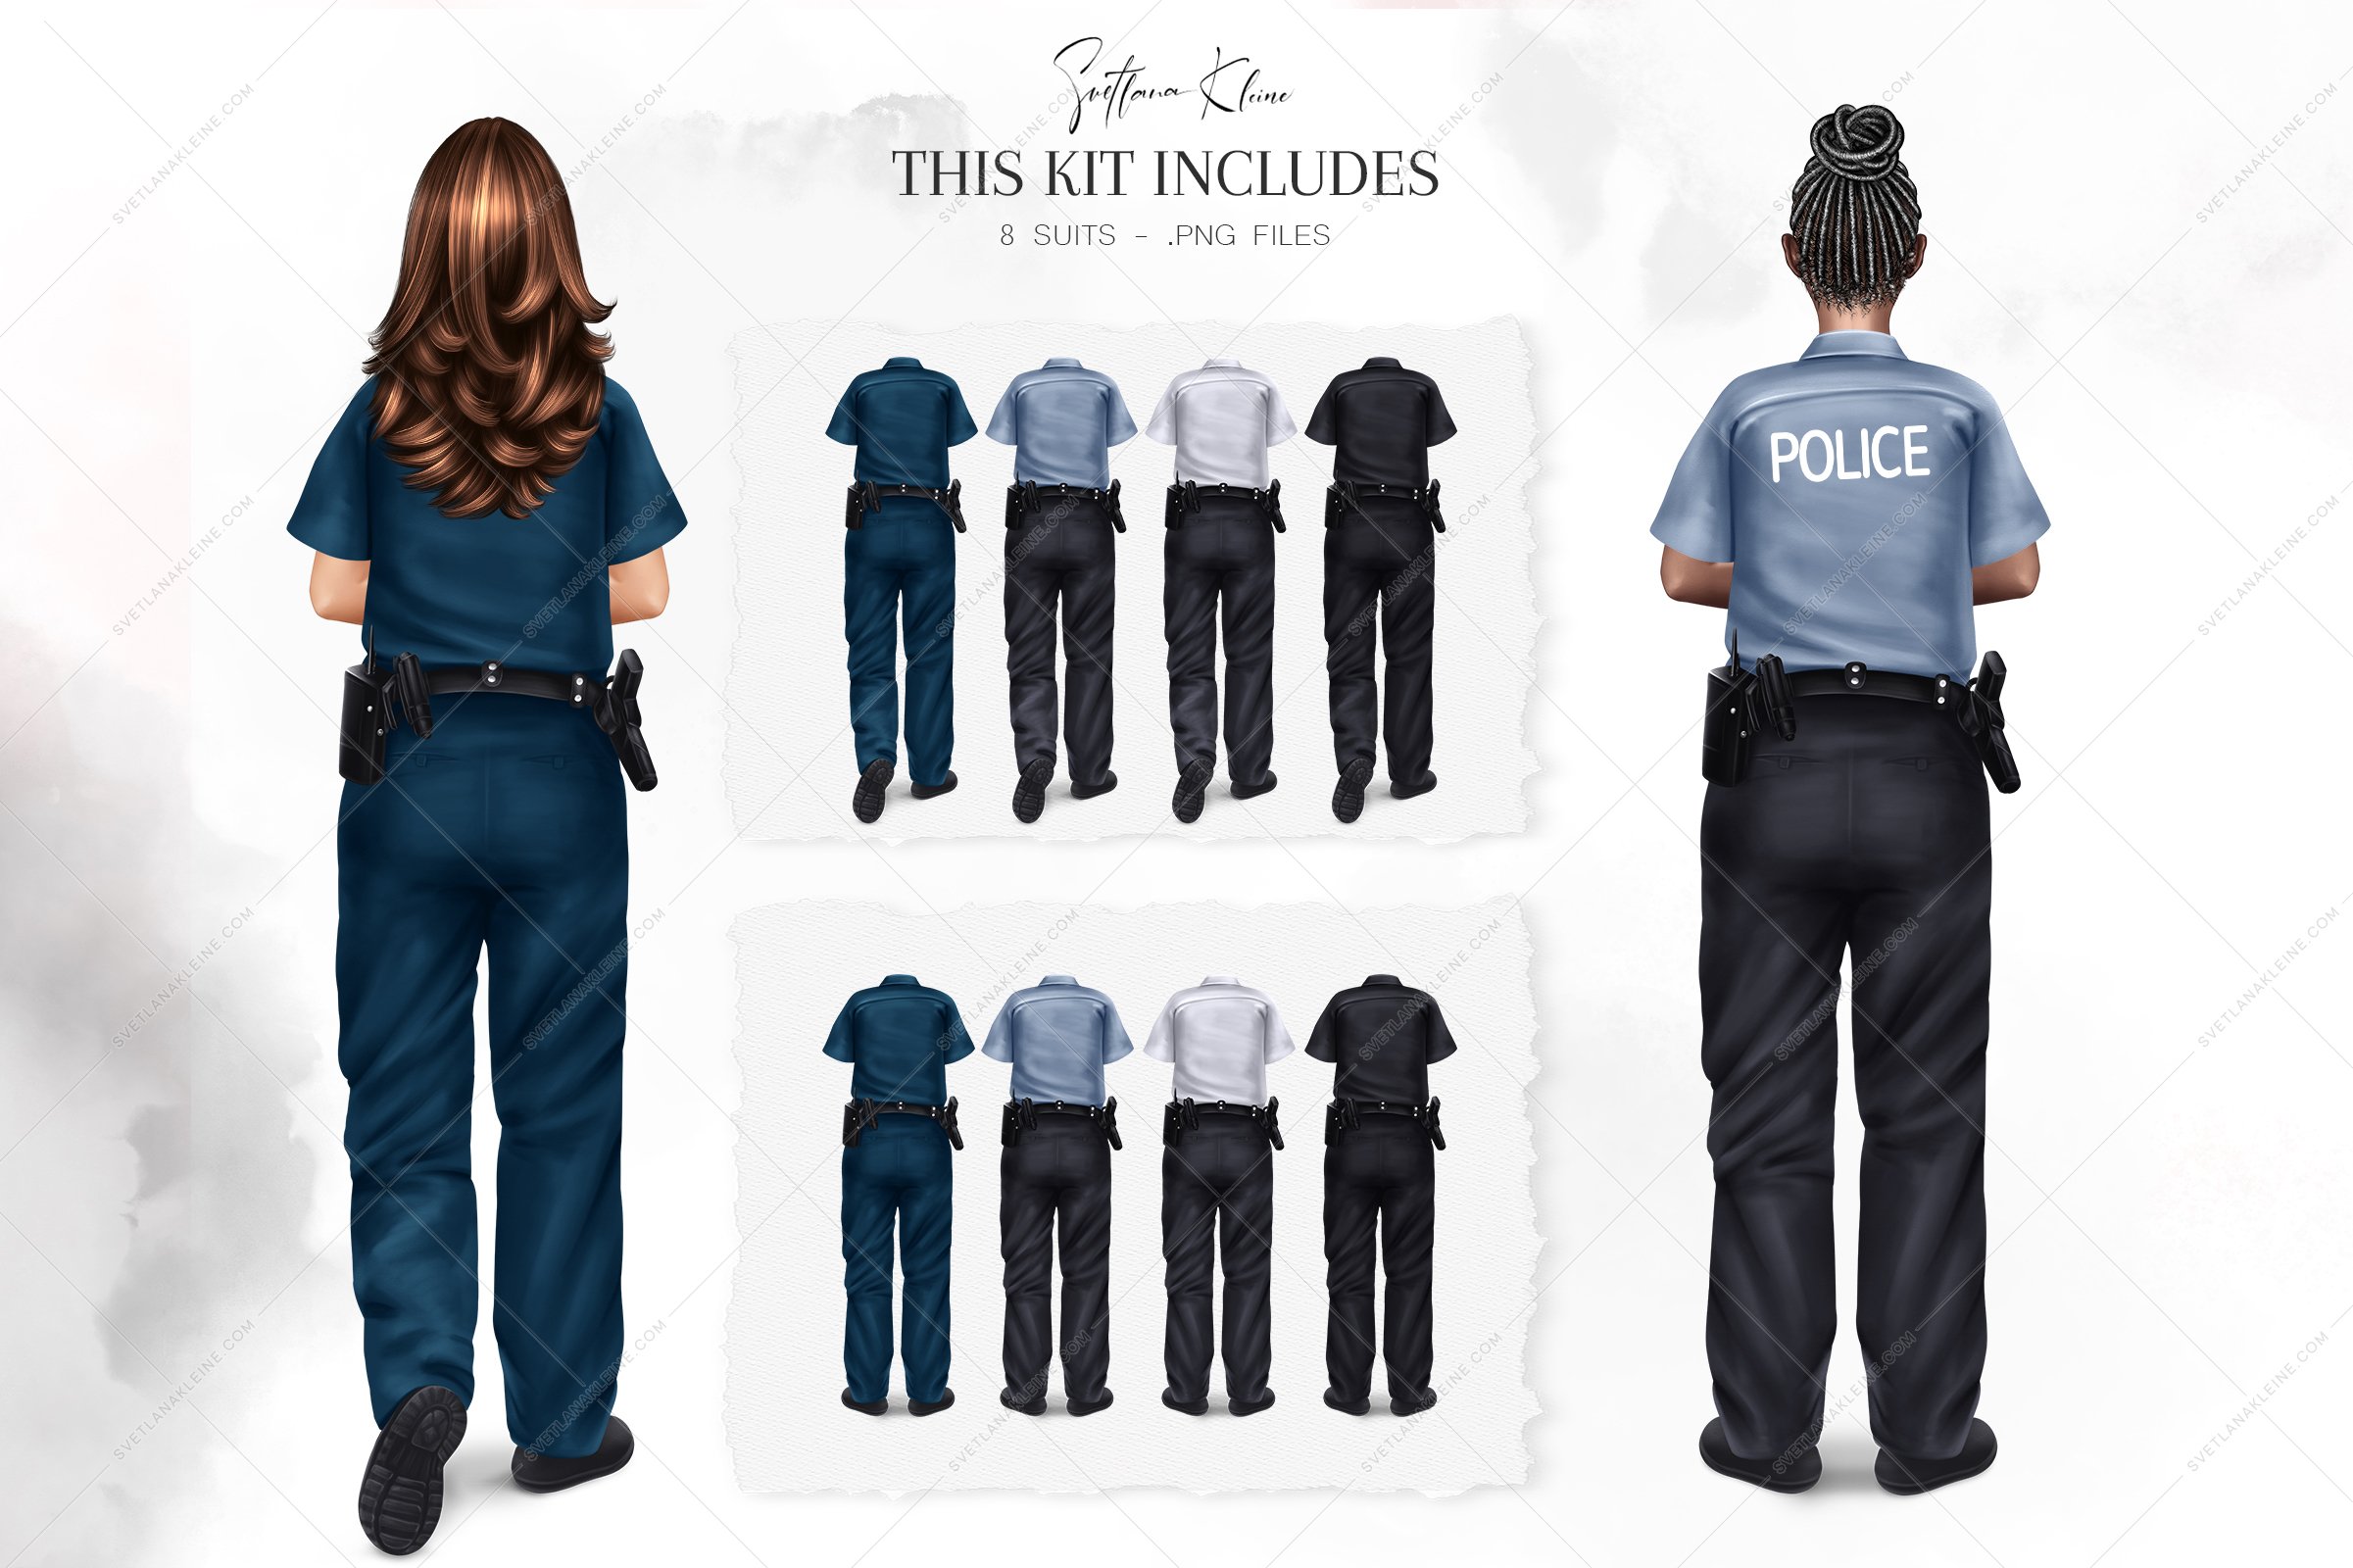 The black lettering "This kit includes" and 2 women - a woman in a blue suit and a woman in a grey shirt with a black trousers and 8 different suits.